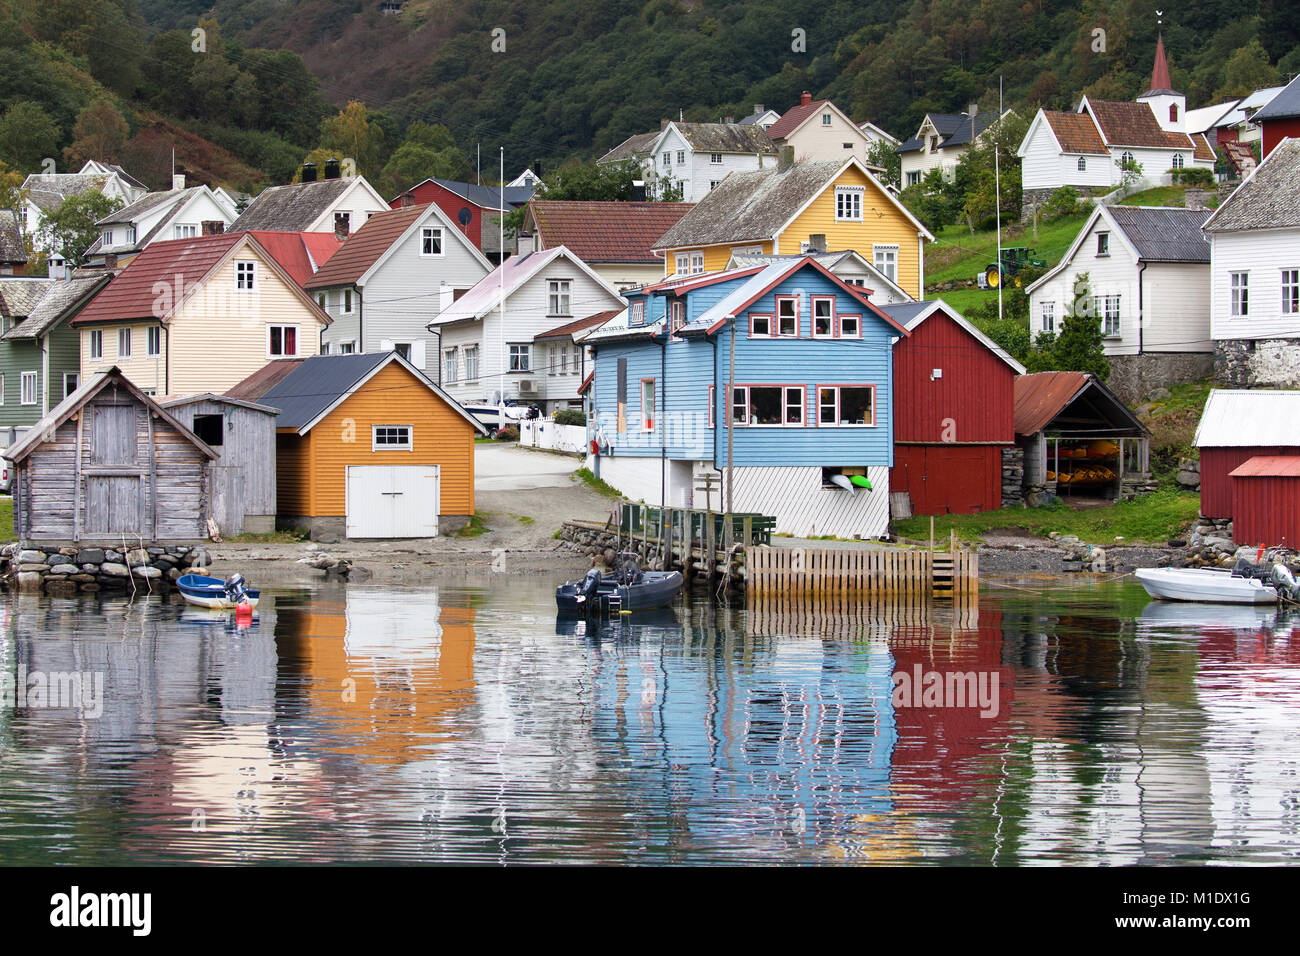 View of the village of Undredal on the shore of Aurlandsfjord, Sognefjord, Norway. Stock Photo